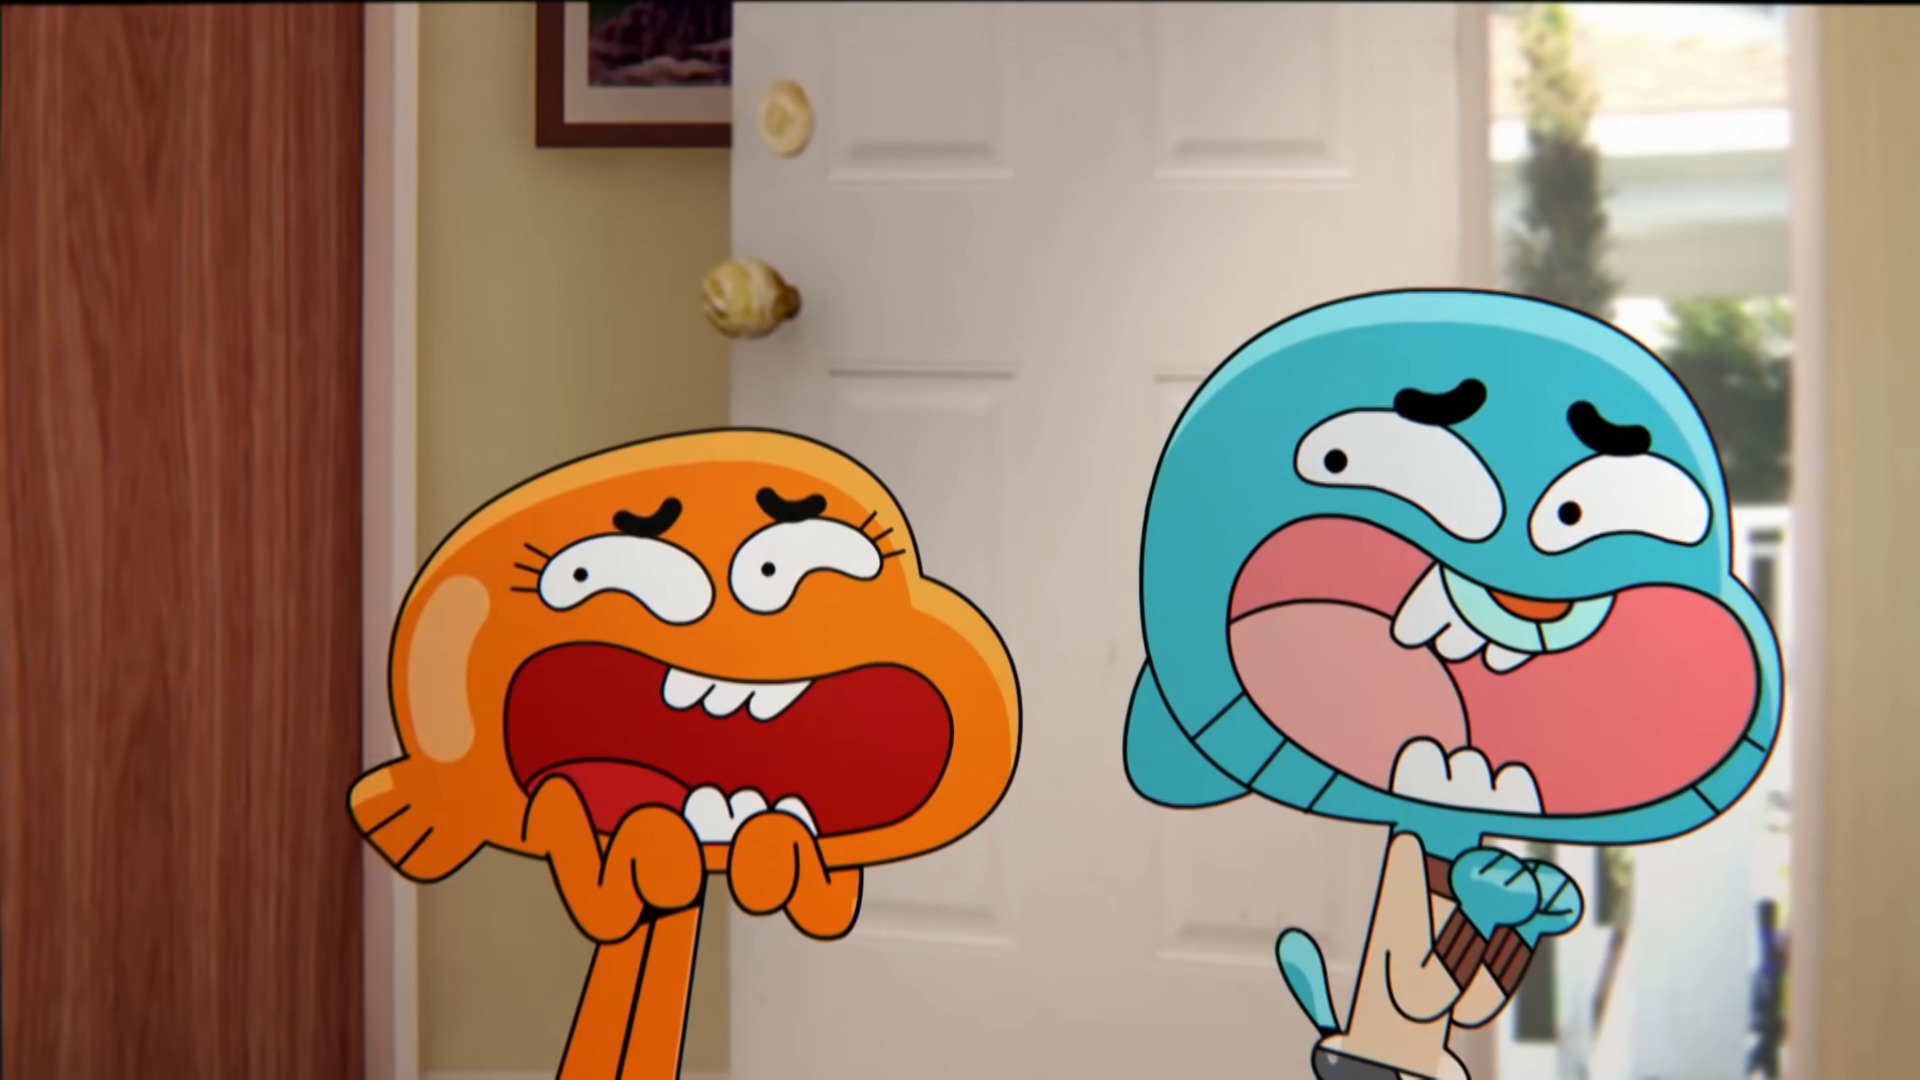 Image Screaming Png The Amazing World Of Gumball Wiki Fandom Powered By Wikia